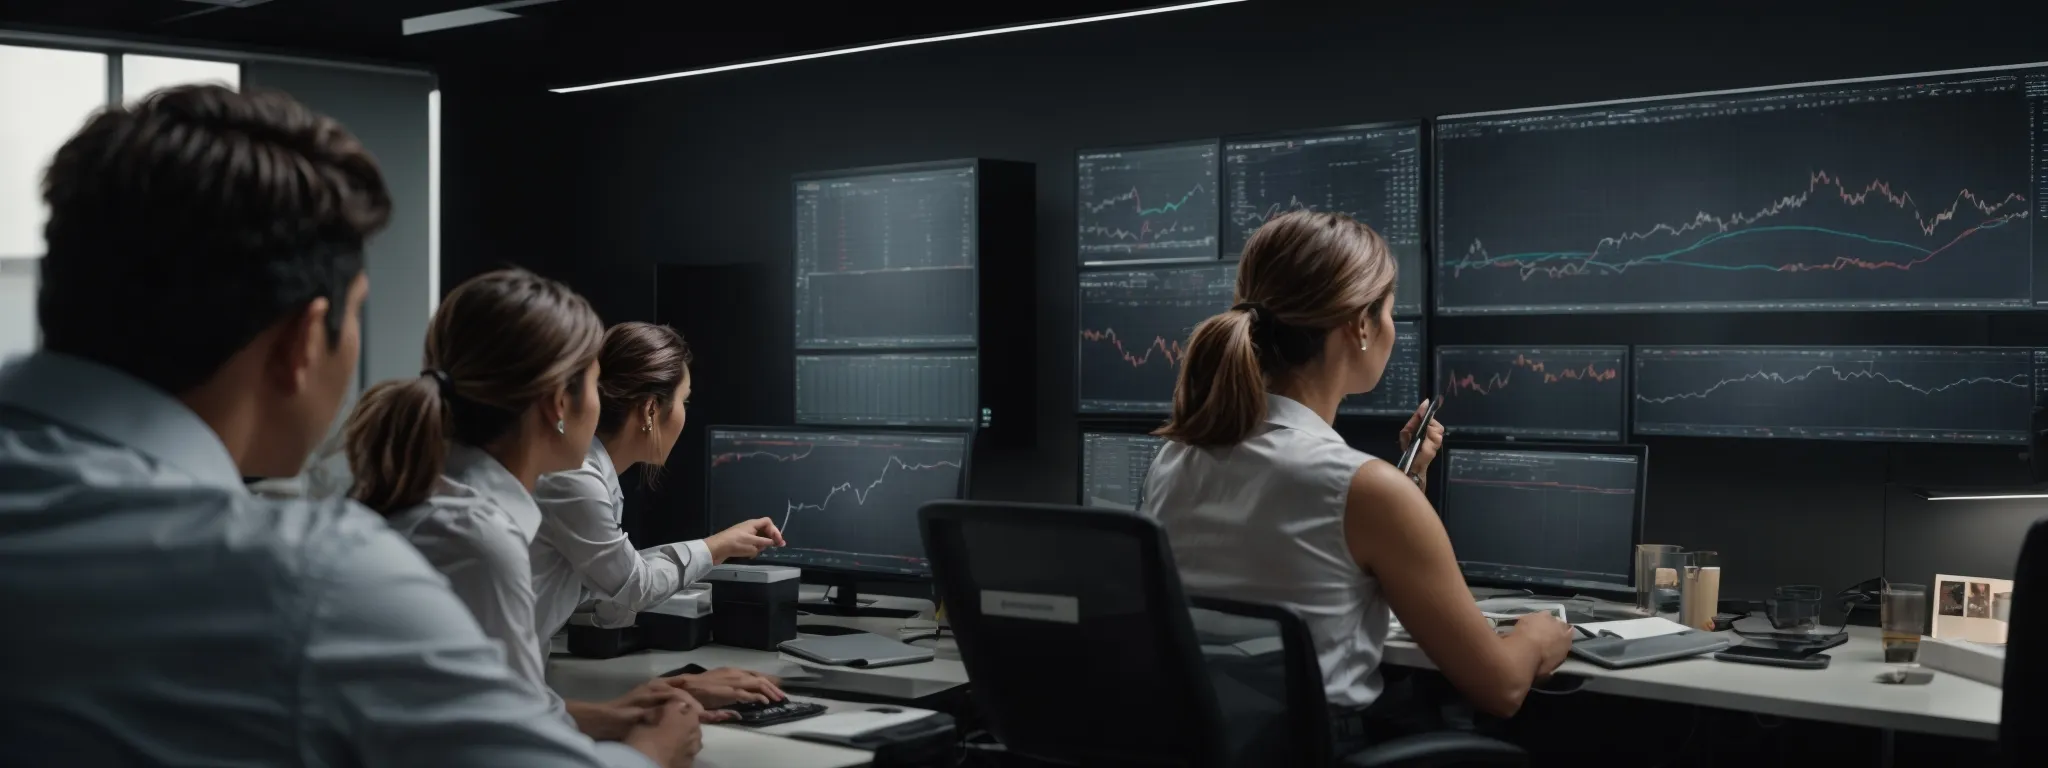 a team analyzes graphs on large monitors in a modern office setting, strategizing their next business move.